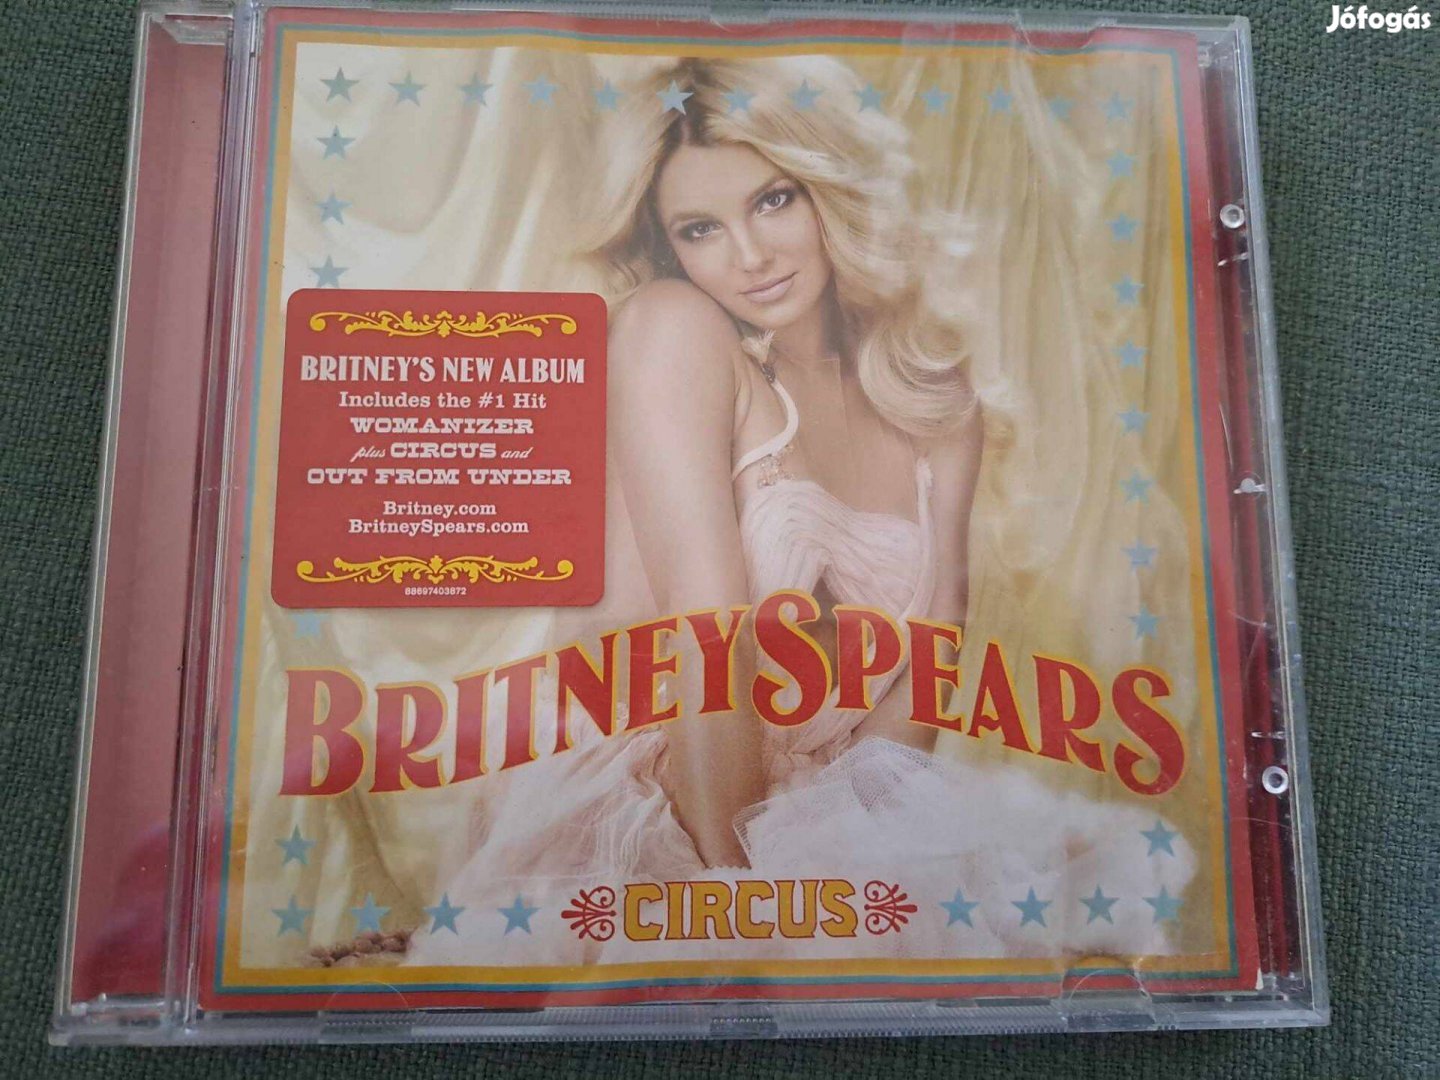 Britney Spears: Circus CD